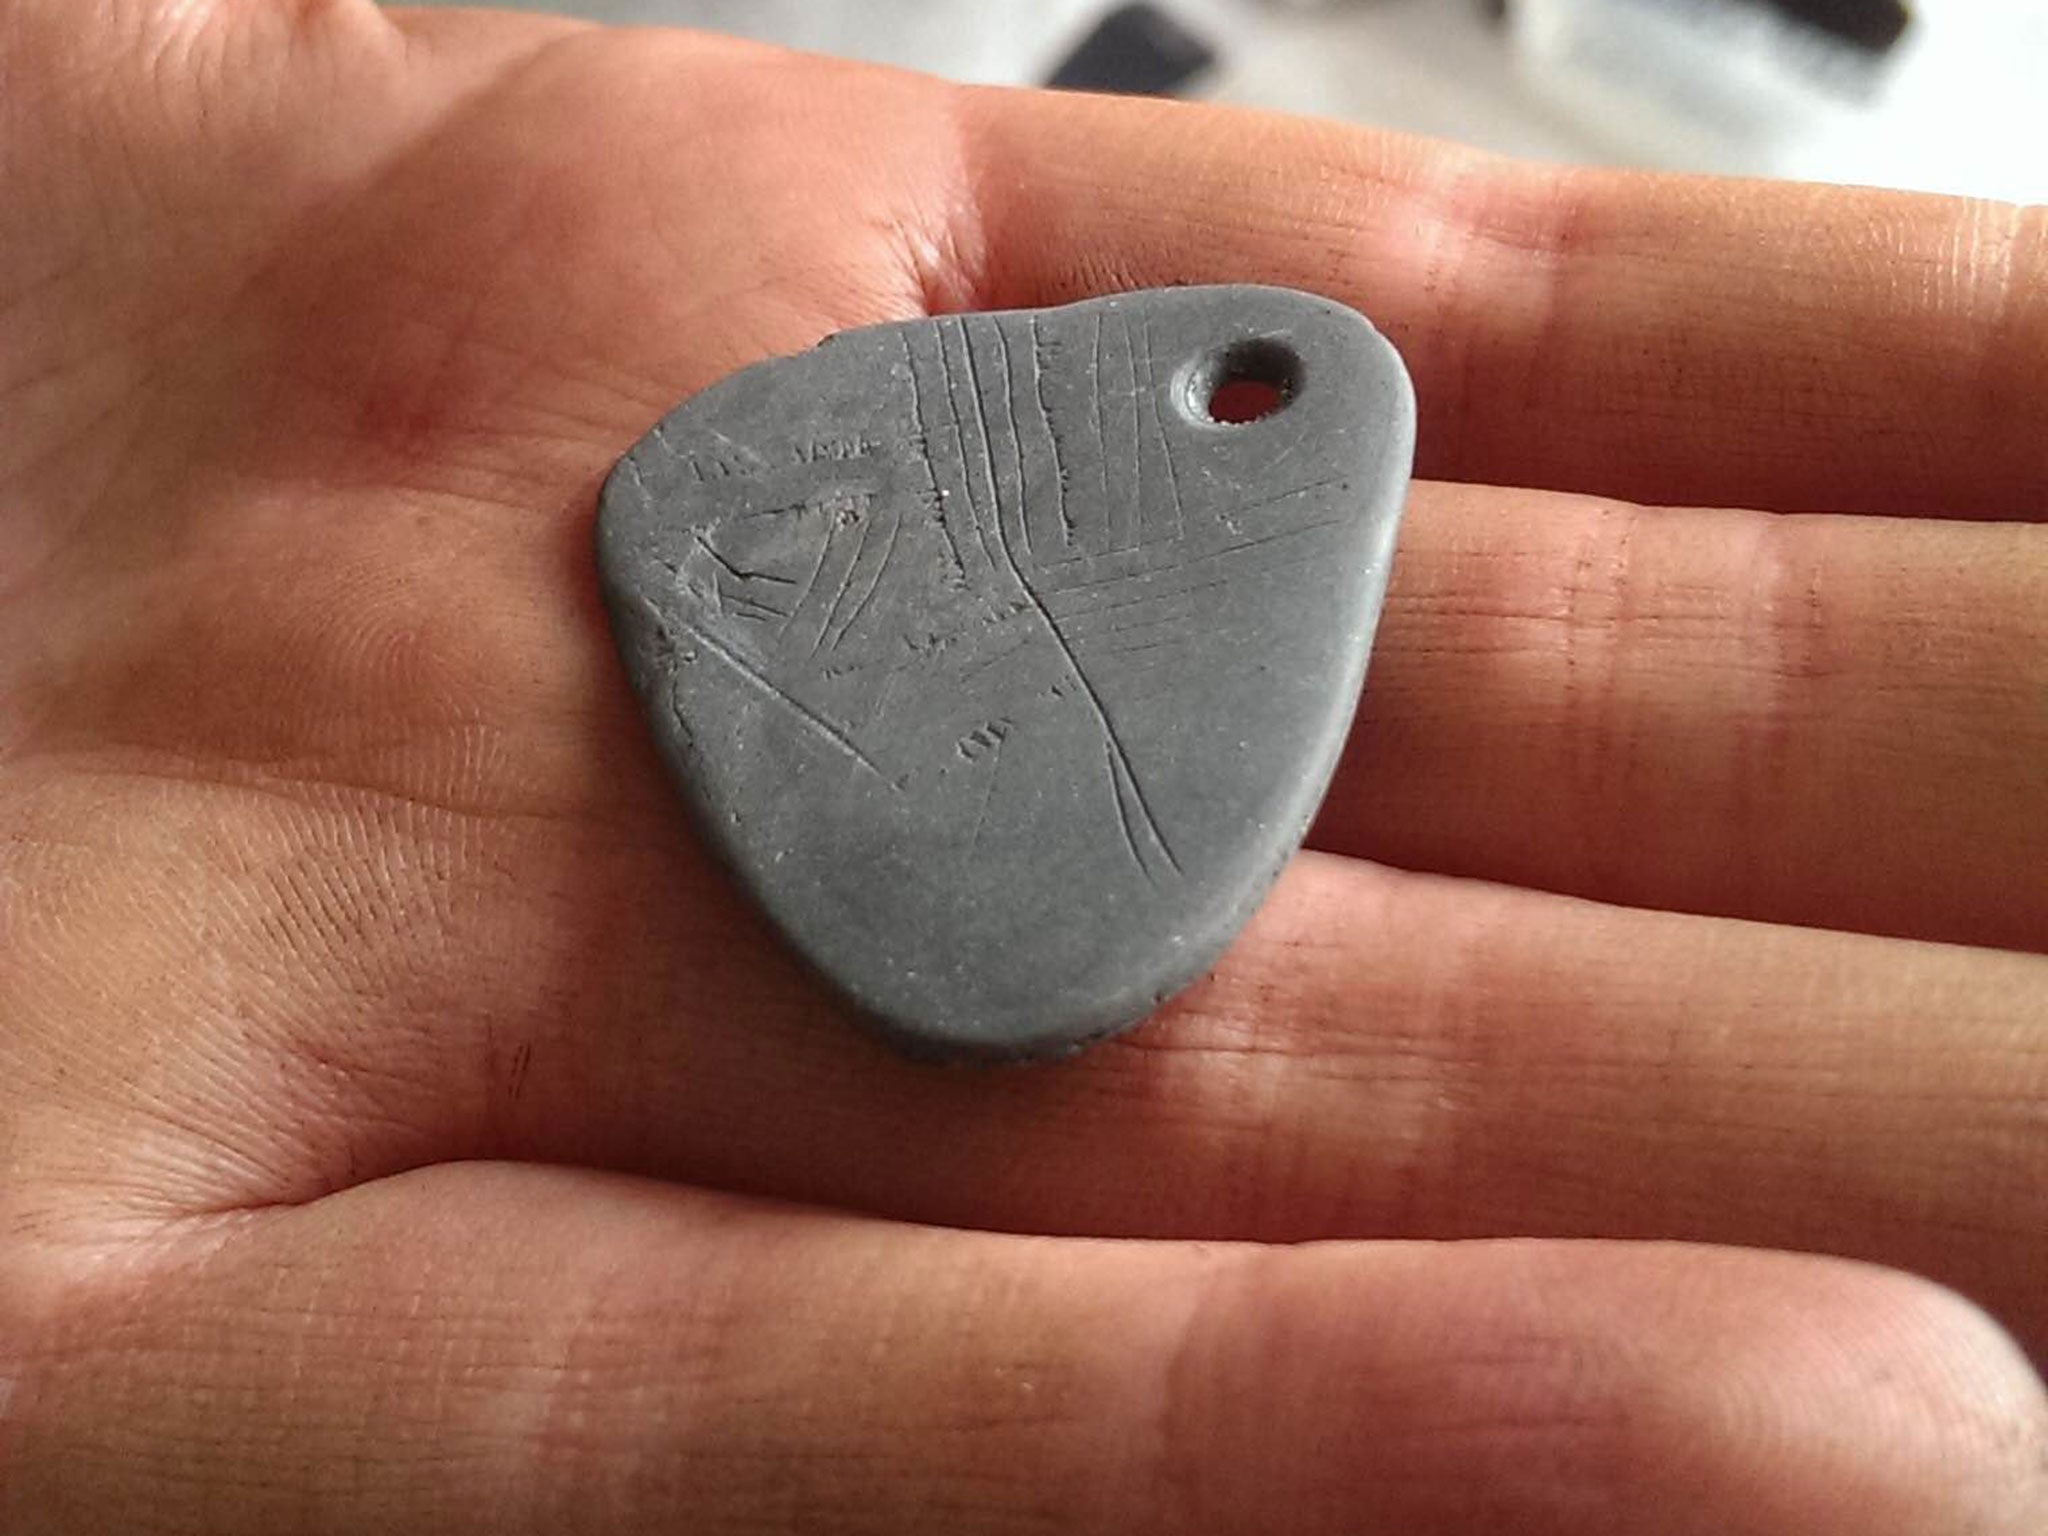 The sacred prehistoric stone pendant, discovered by archaeologists in Yorkshire. It was probably worn by a shaman carrying out hunting-related rituals